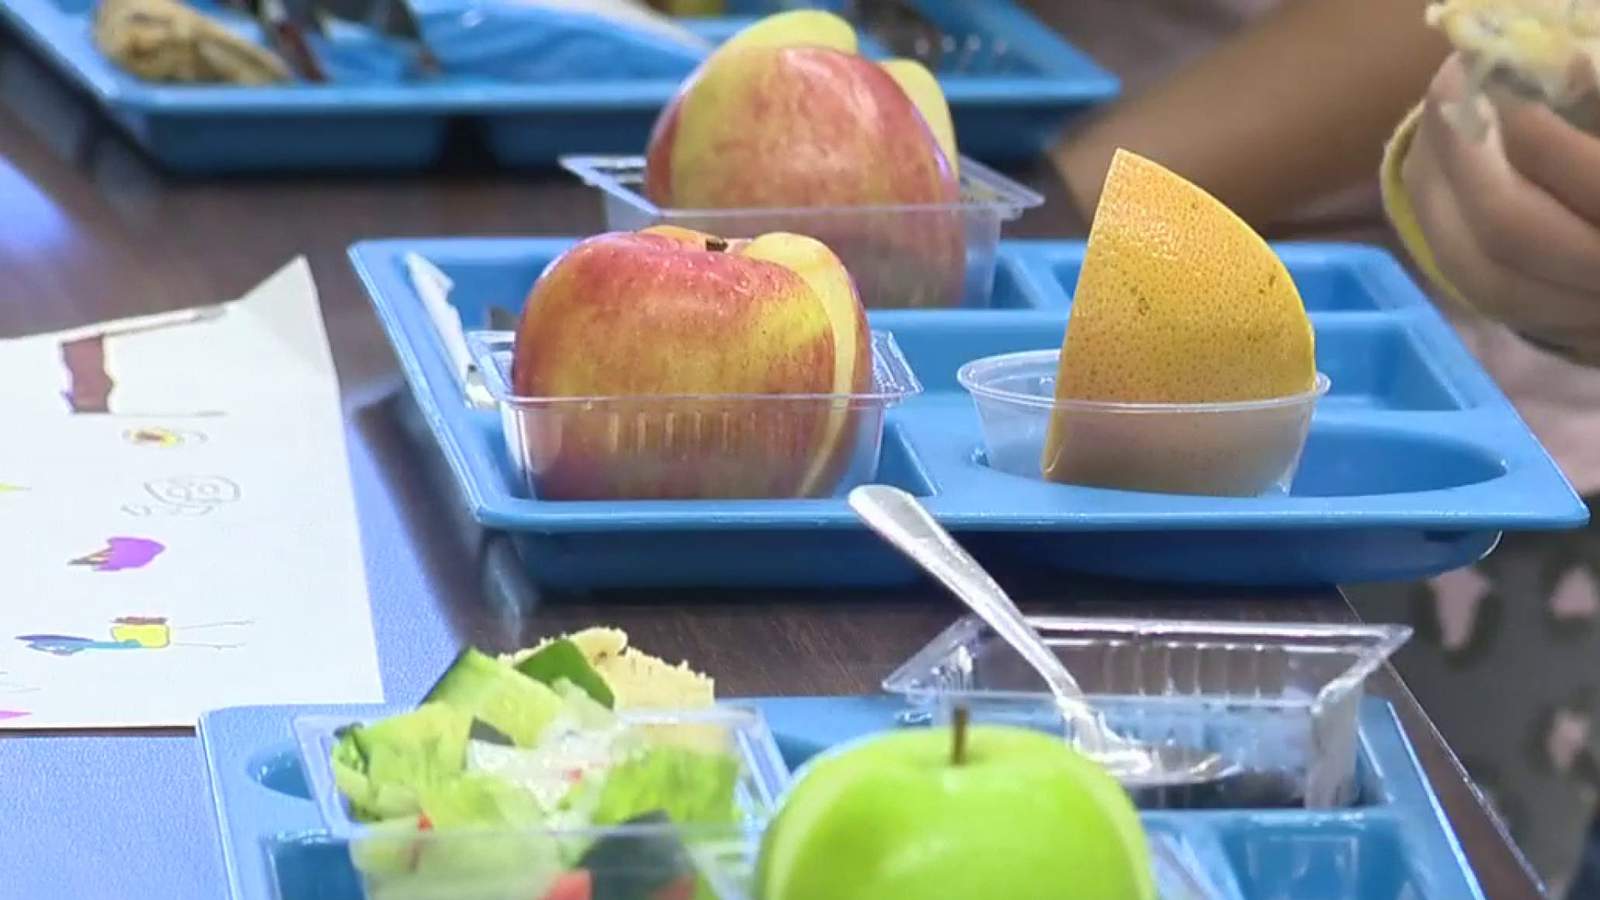 Ask 2: My kids receive free lunch at school, will they be eligible if they stay home?